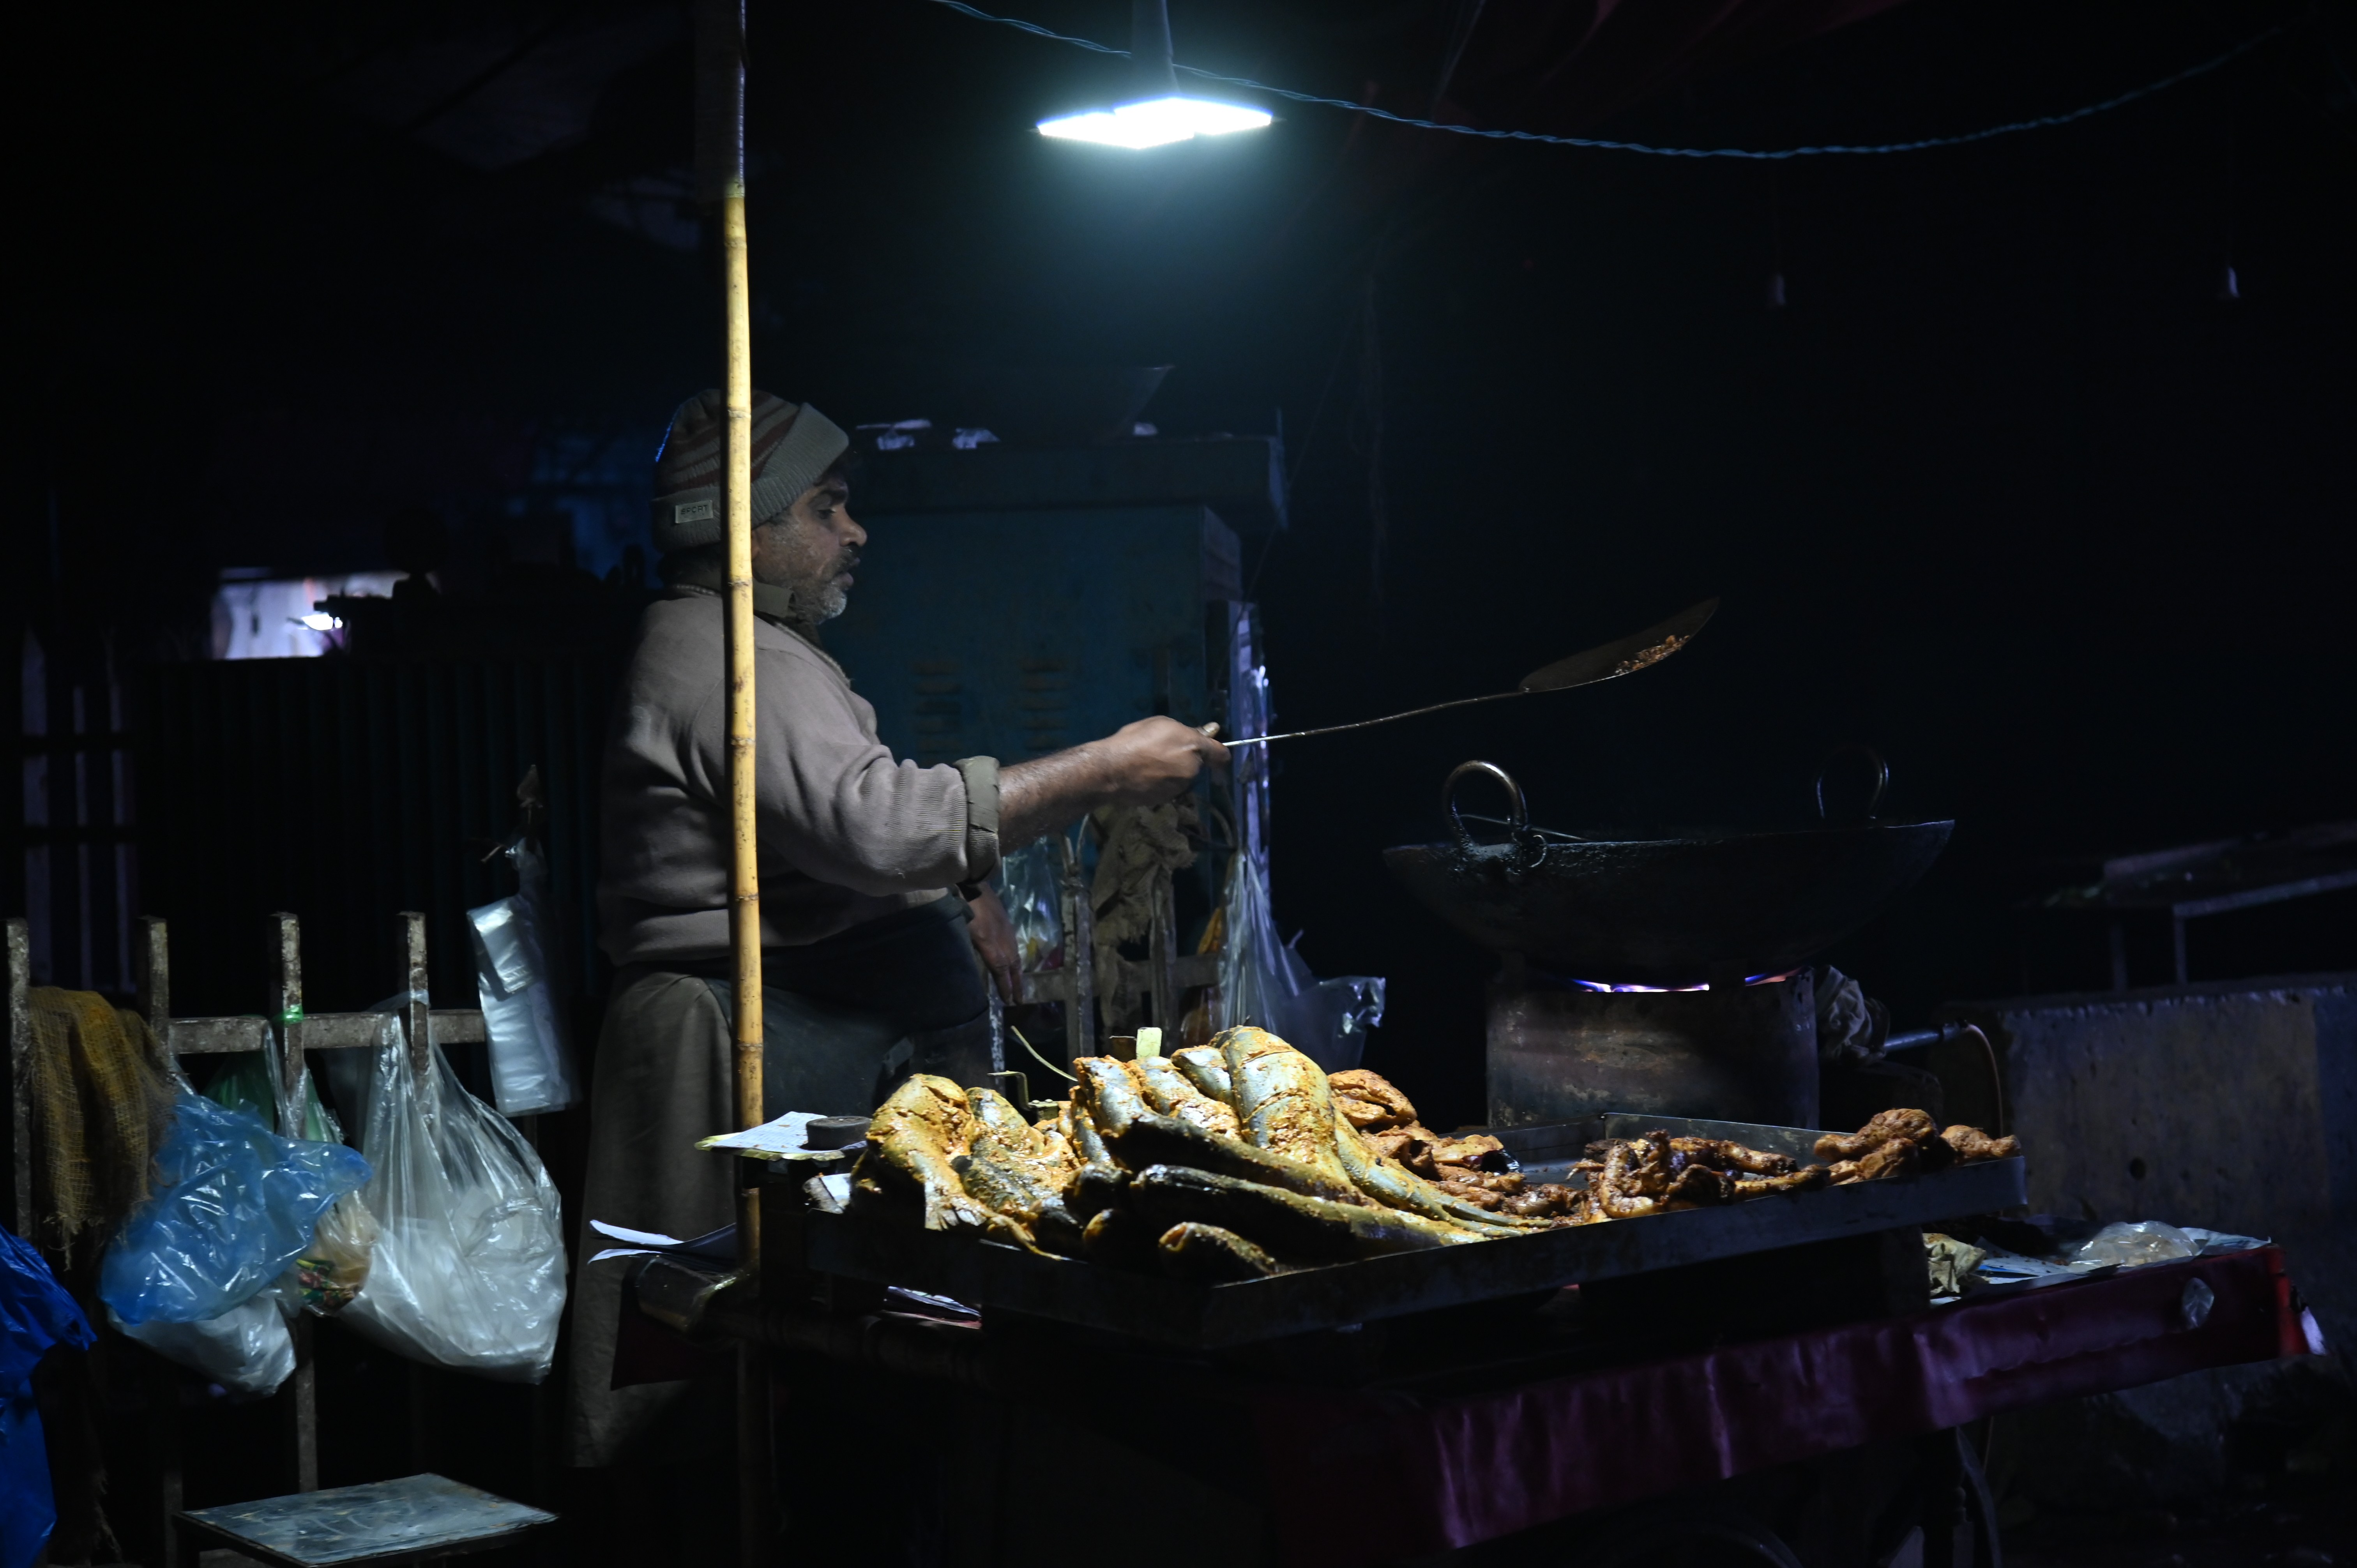 A man busy in frying the fish